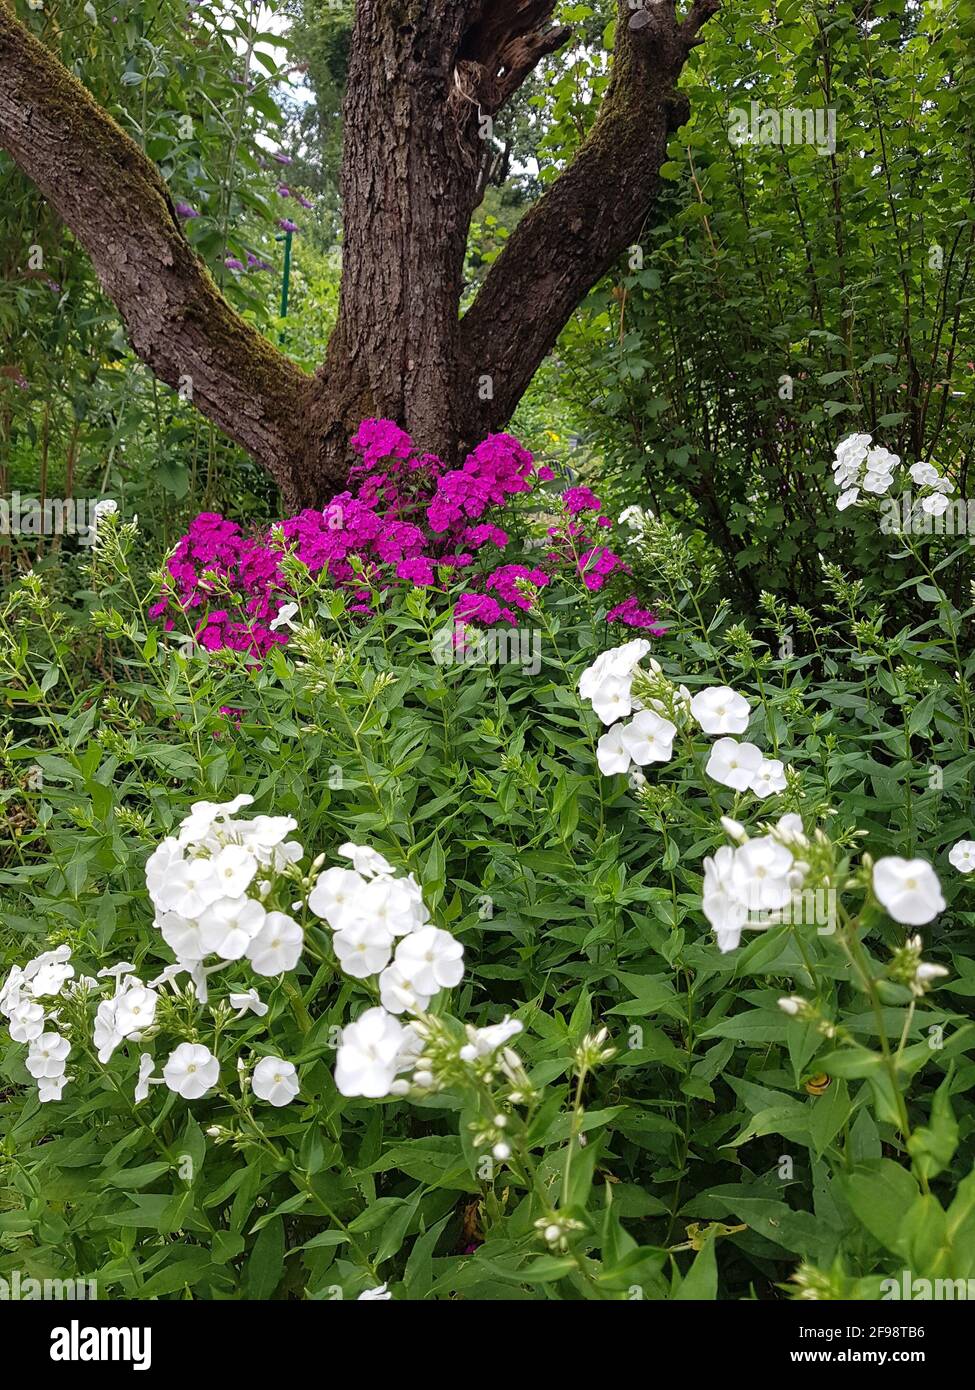 White and purple phlox perennials in the garden Stock Photo